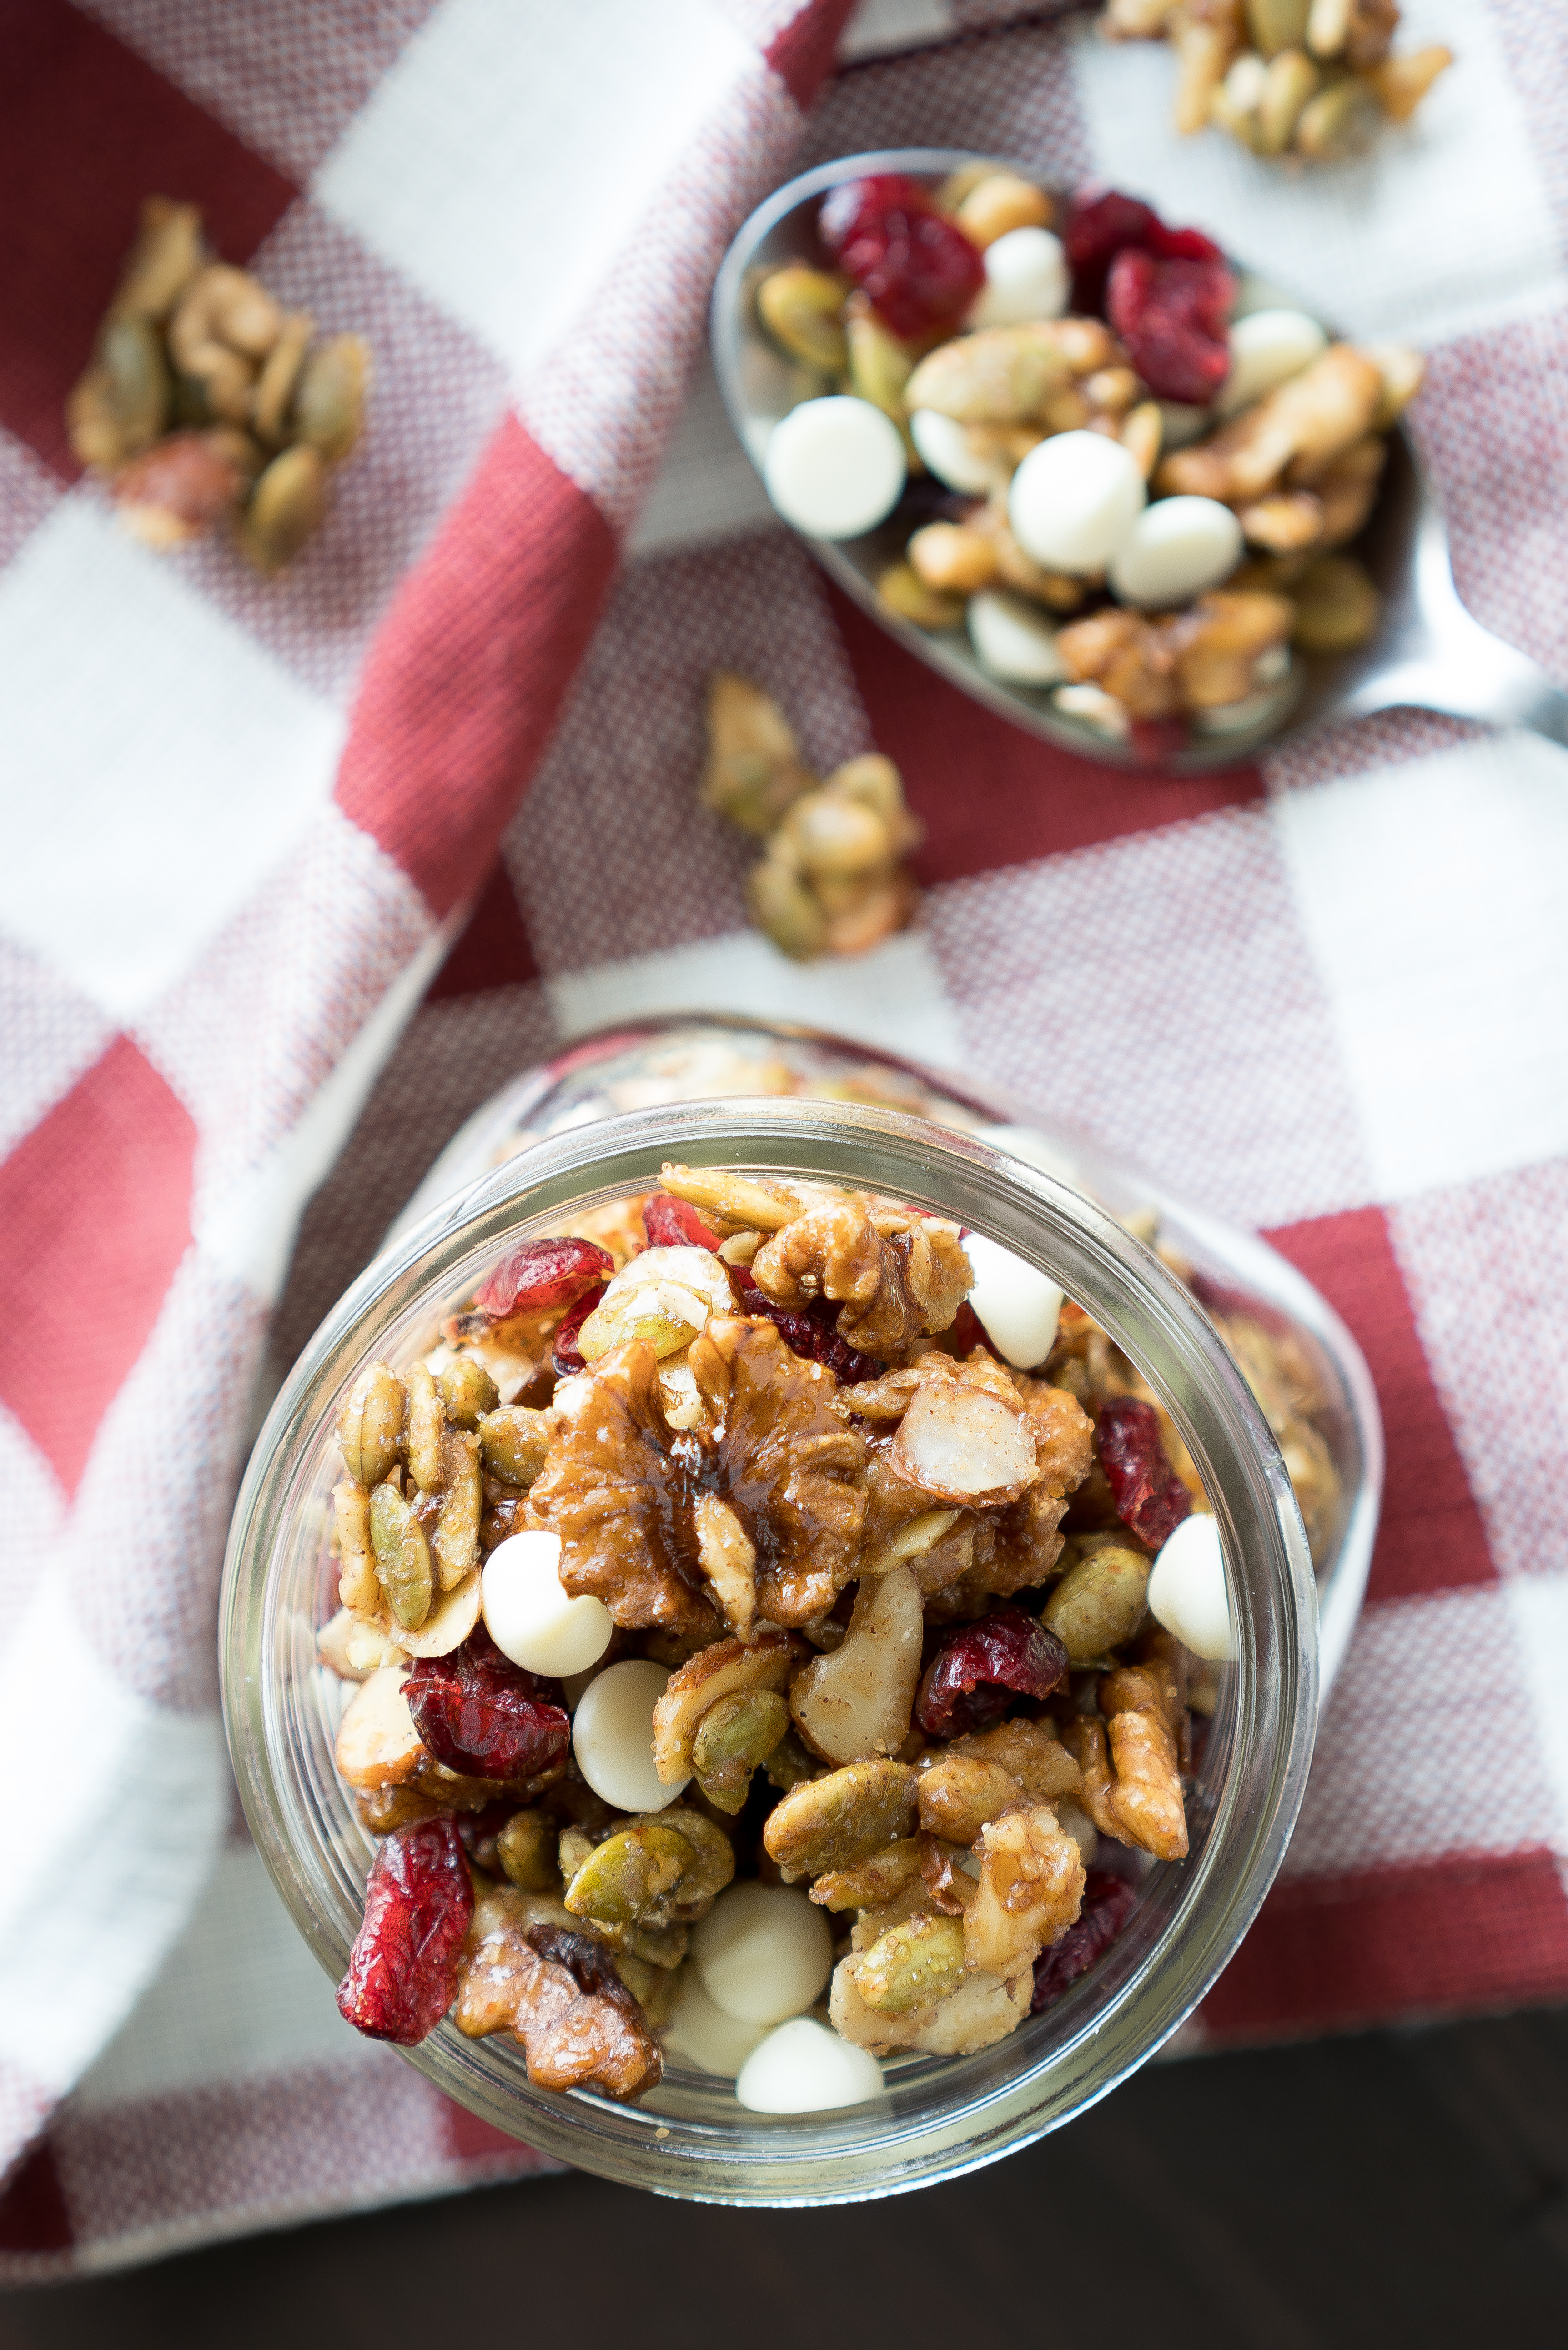 Cranberry Maple Trail Mix – Easy recipe for cinnamon-spiced Cranberry Maple Trail Mix! Walnuts, pumpkin seeds, & almonds are lightly glazed in maple syrup & brown sugar. With lots of tart dried cranberries & white chocolate chips folded in. We love this as a sweet snack on-the-go or homemade holiday gift! ♥ | freeyourfork.com